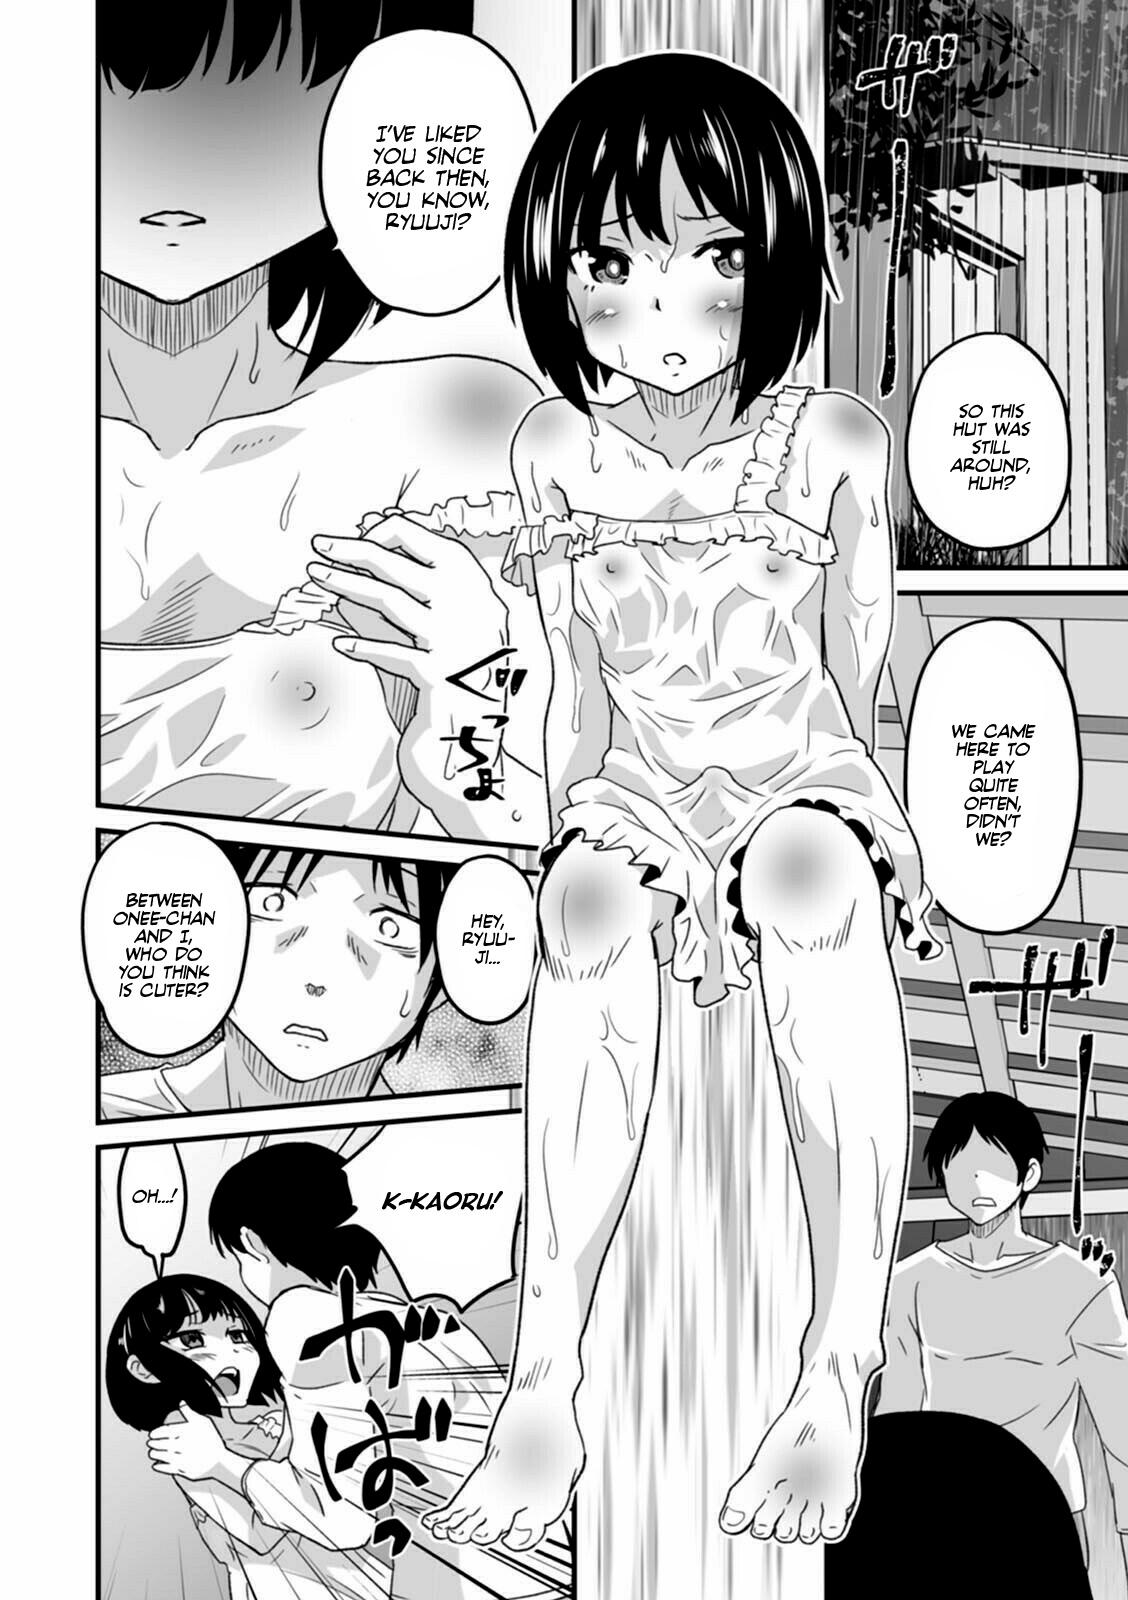 Follada Bouquet no Omajinai | The magic of the bouquet Anal Creampie - Page 6